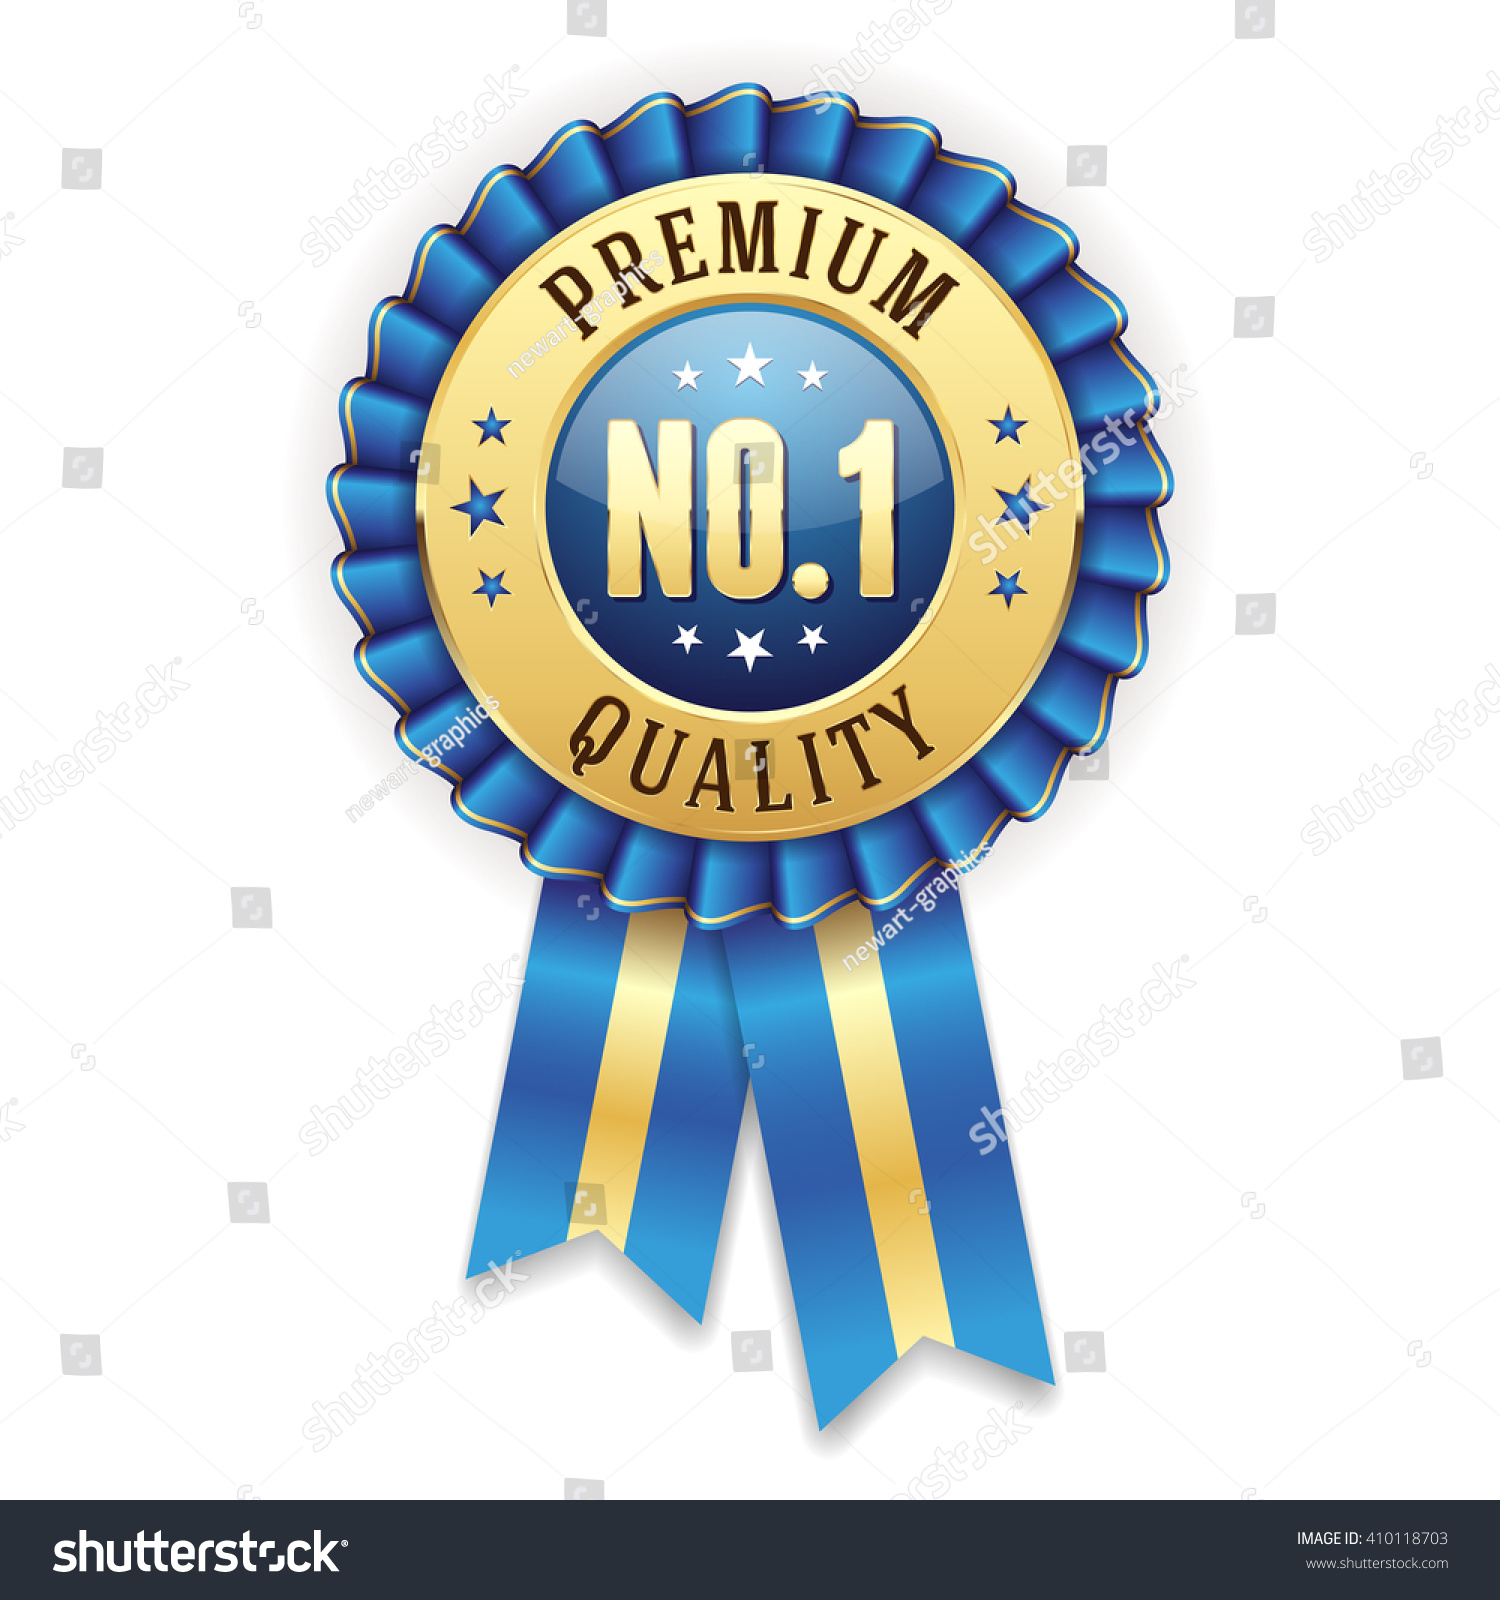 Gold No 1 Premium Quality Badge Stock Vector Royalty Free 410118703